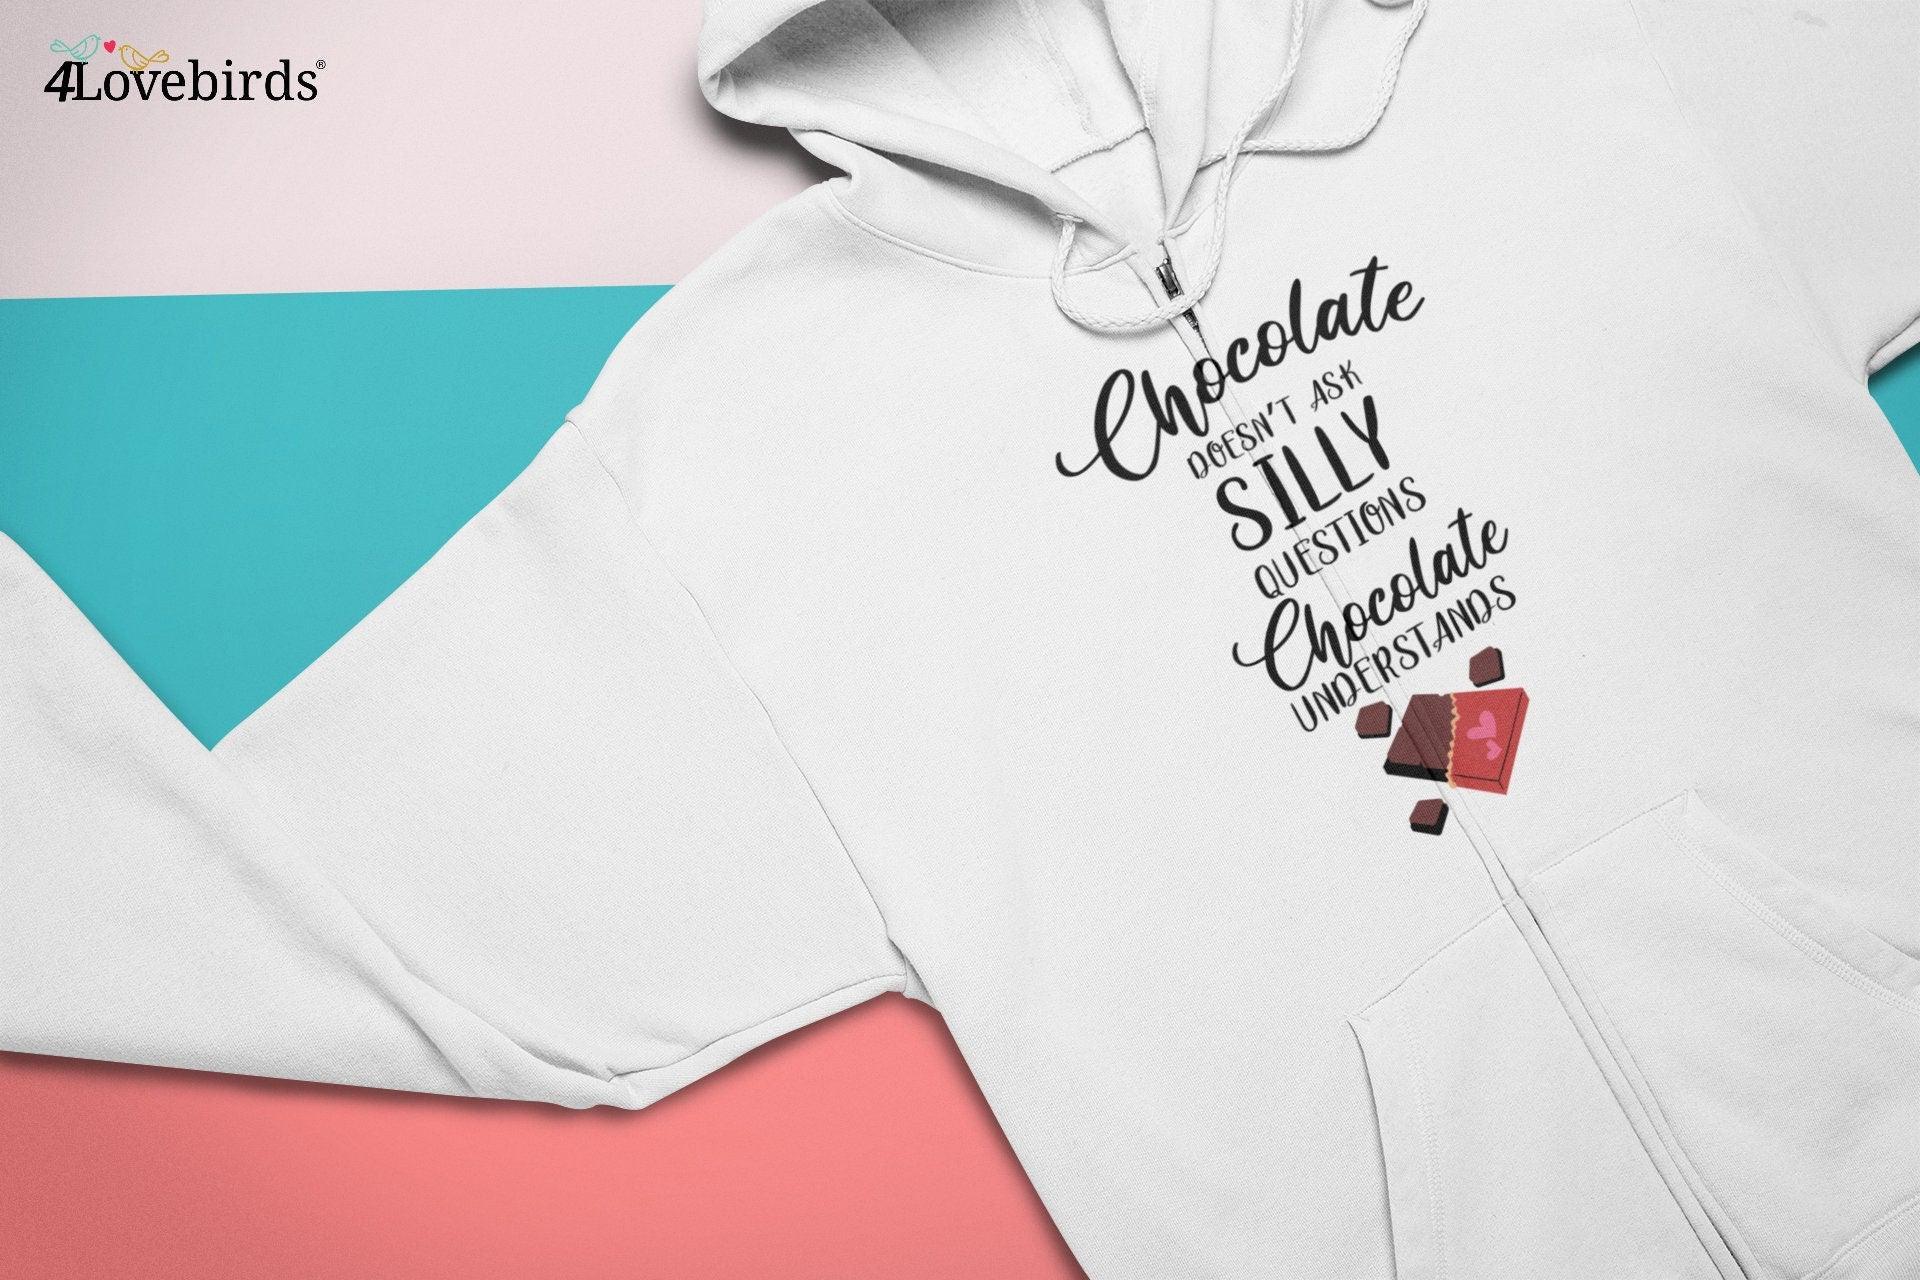 Chocolate doesn't ask silly questions Chocolate understands Hoodie, Funny T-shirt, Gift for Couples, Boyfriend and Girlfriend Longsleeve - 4Lovebirds